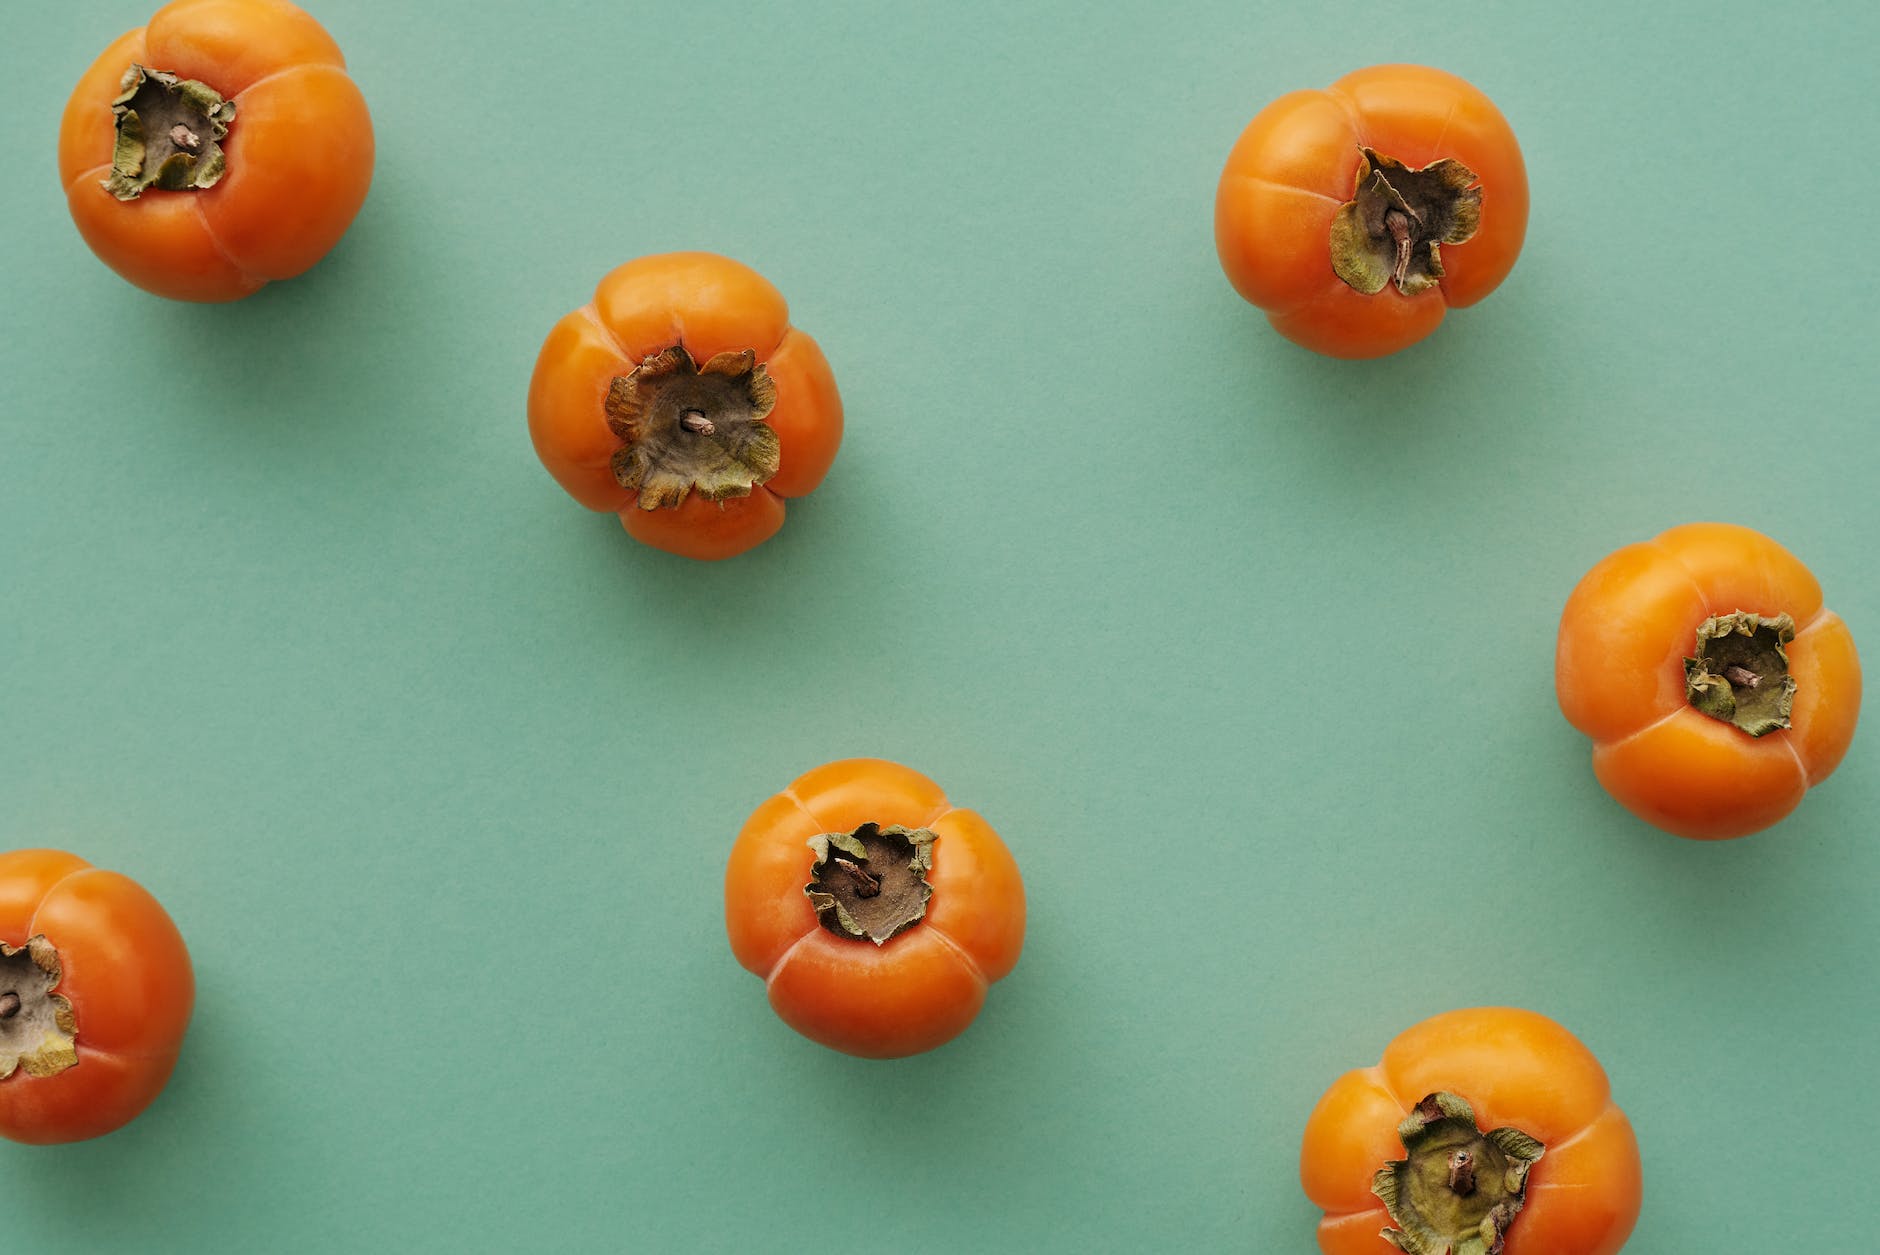 orange persimmons on blue surface